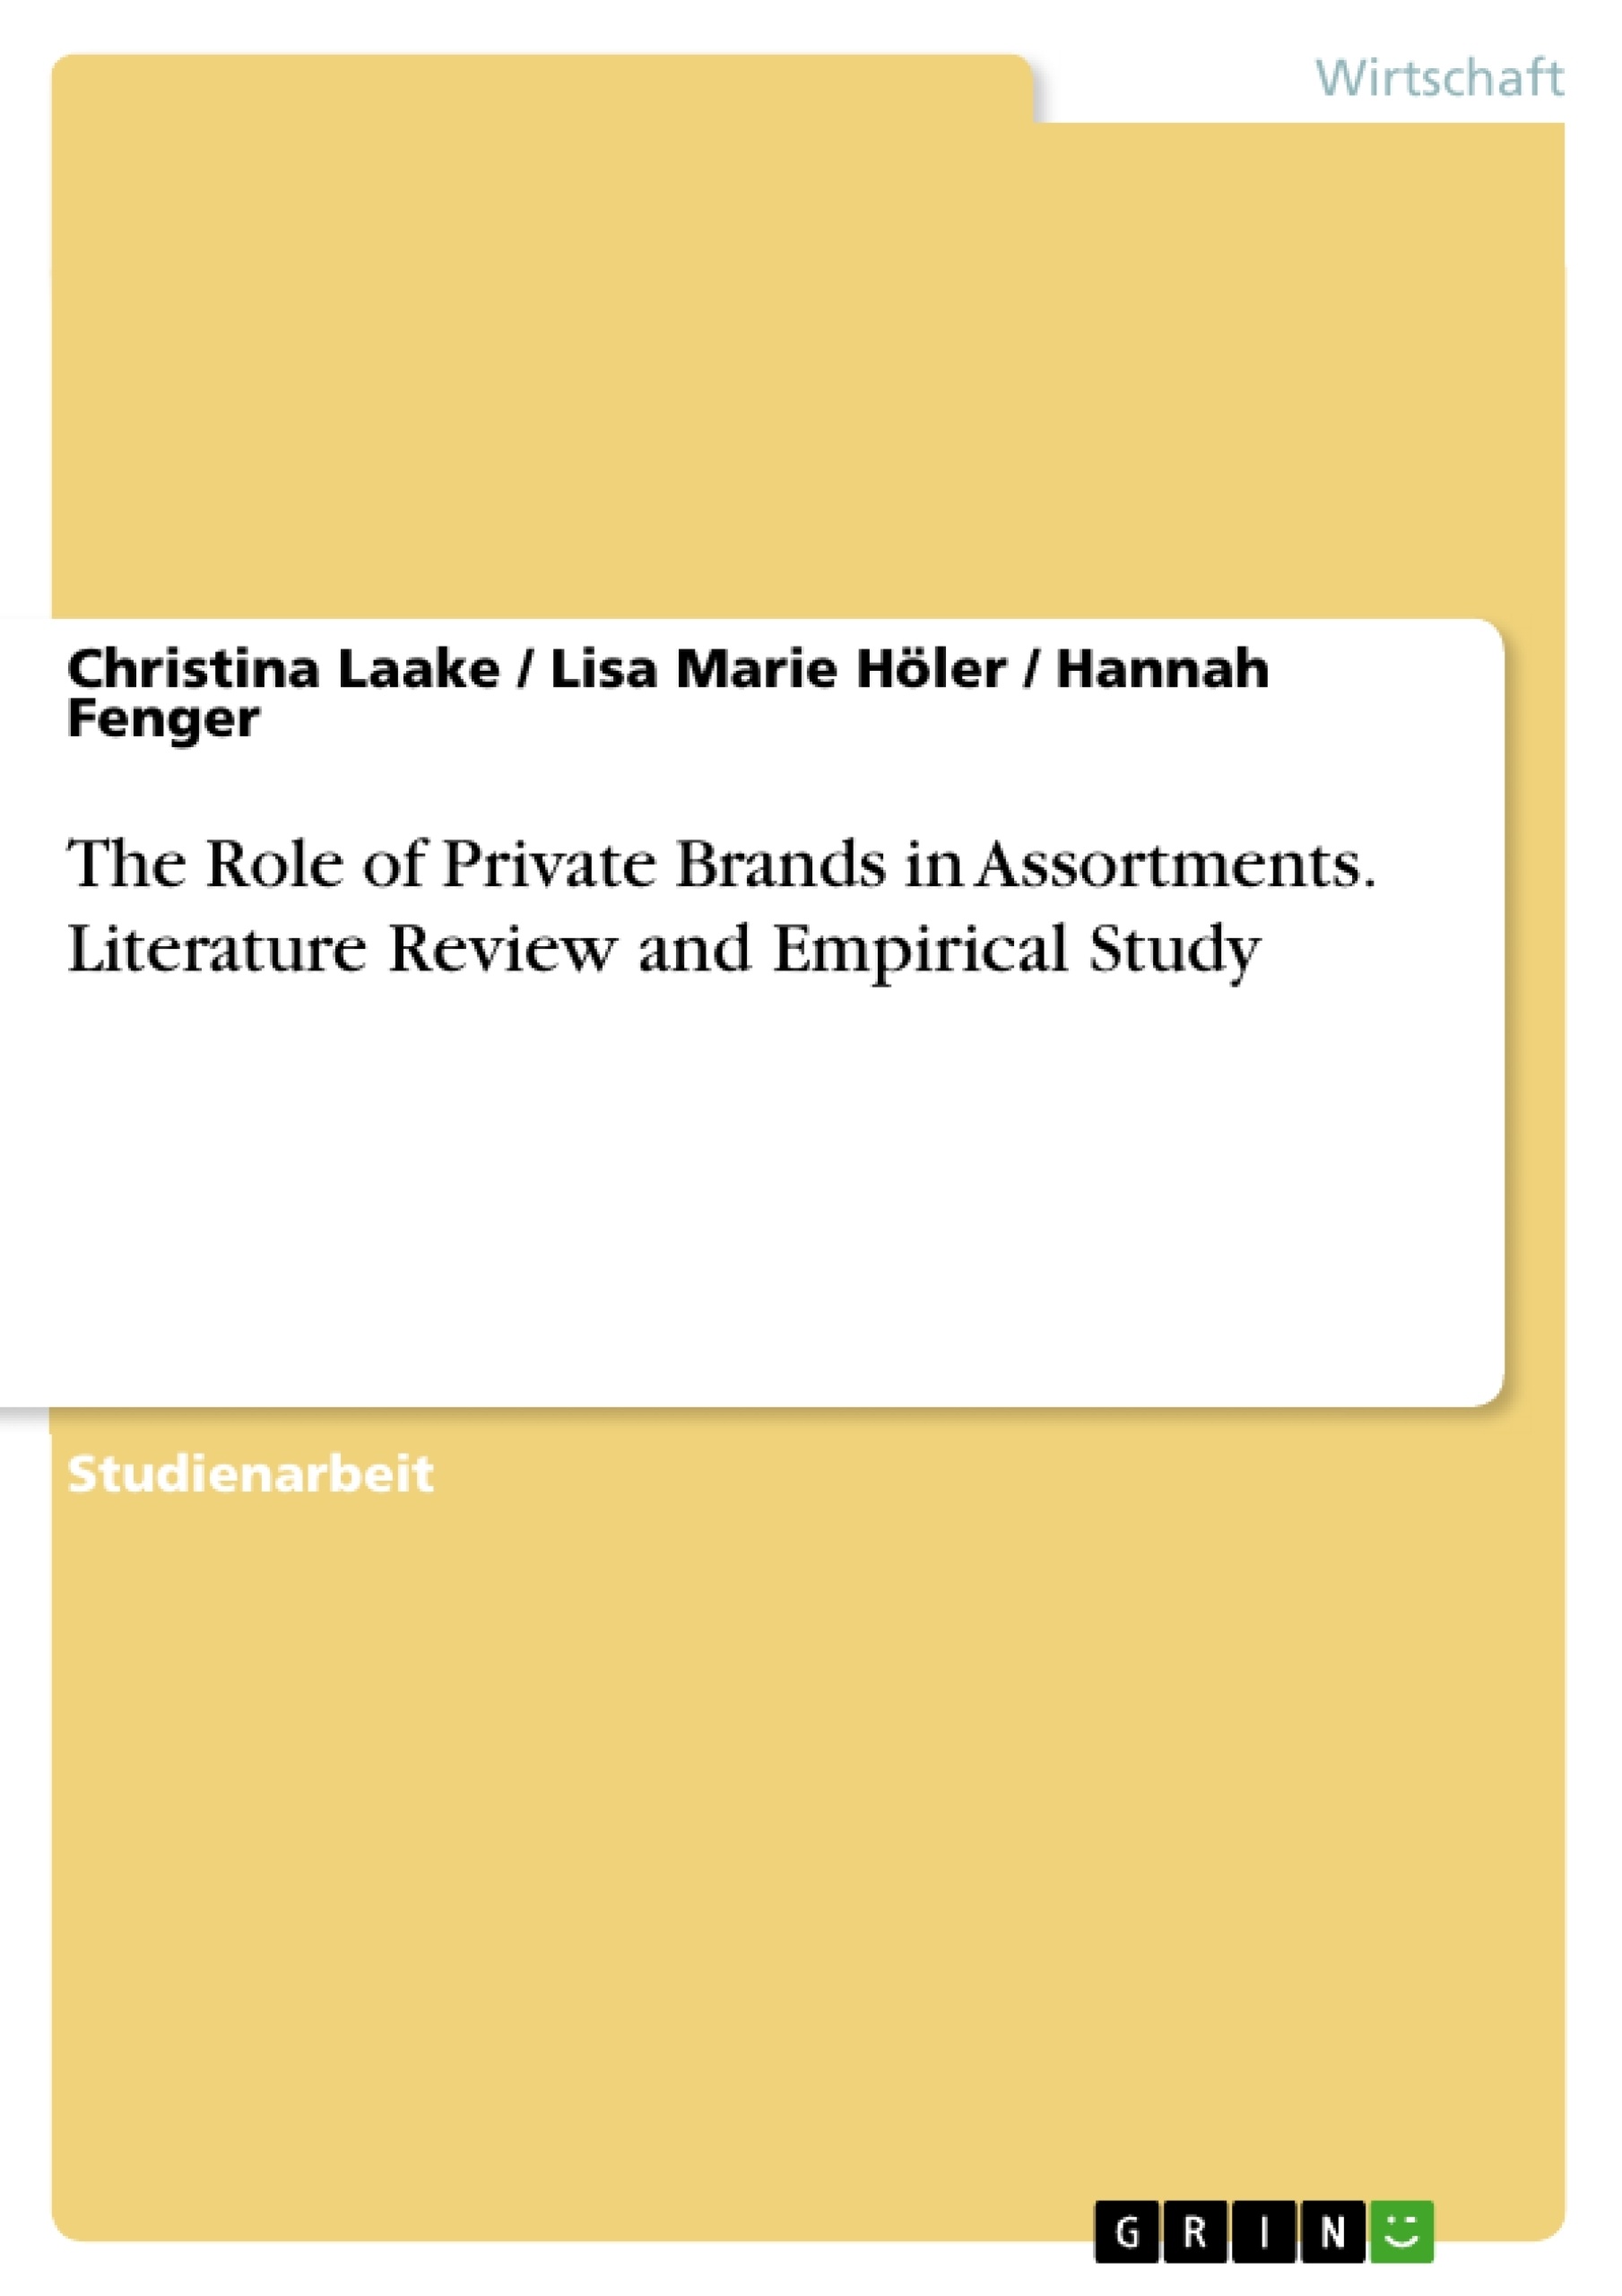 Titel: The Role of Private Brands in Assortments. Literature Review and Empirical Study